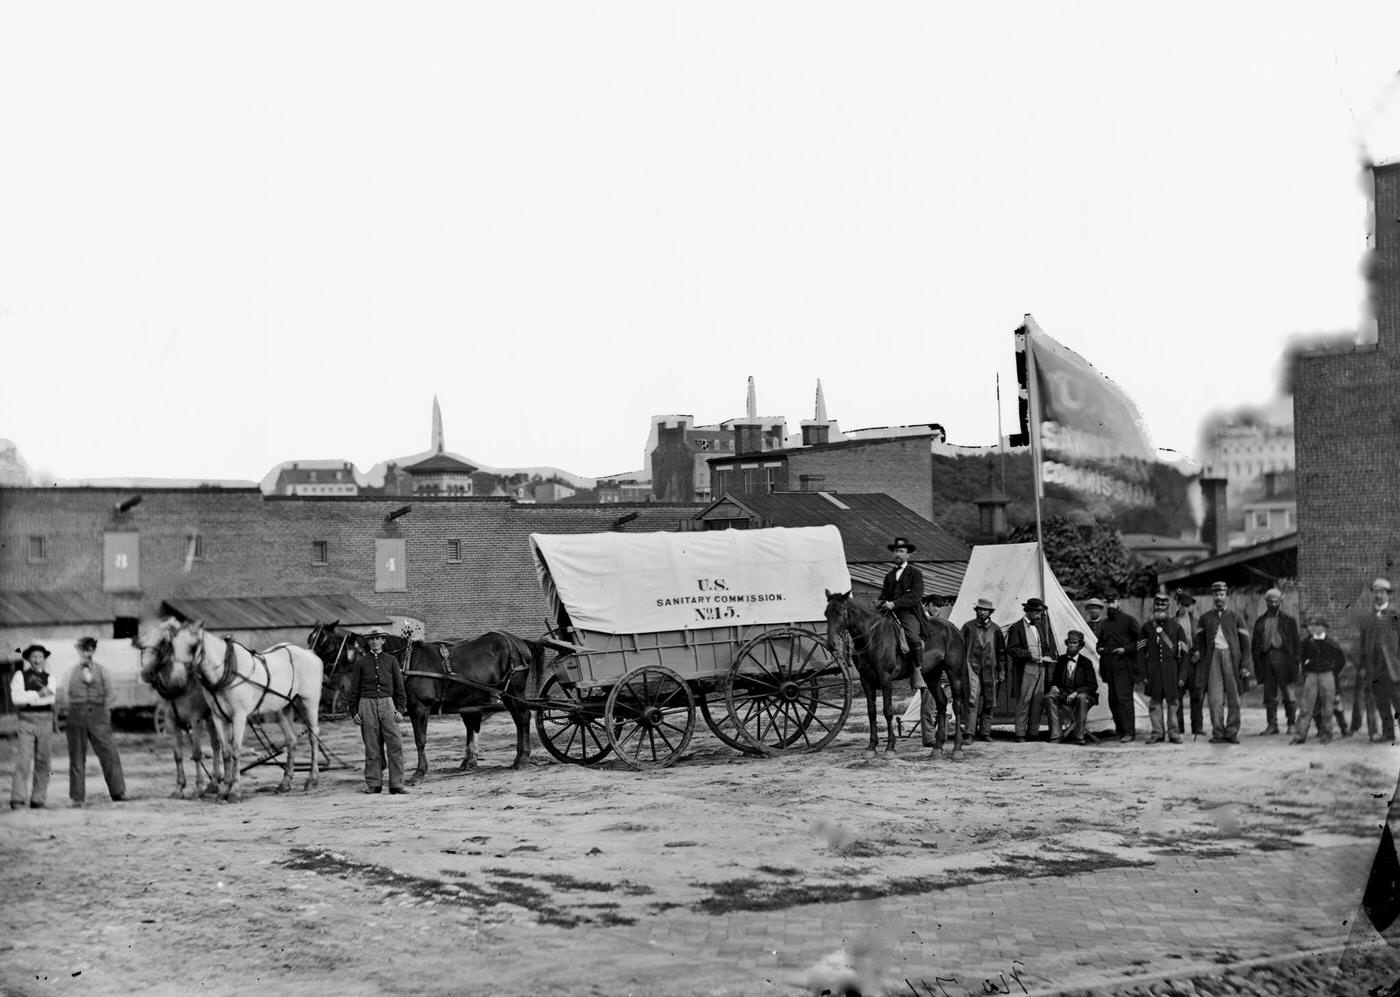 Field relief wagons and workers of the US Sanitary Commission, Washington, D.C., 1865